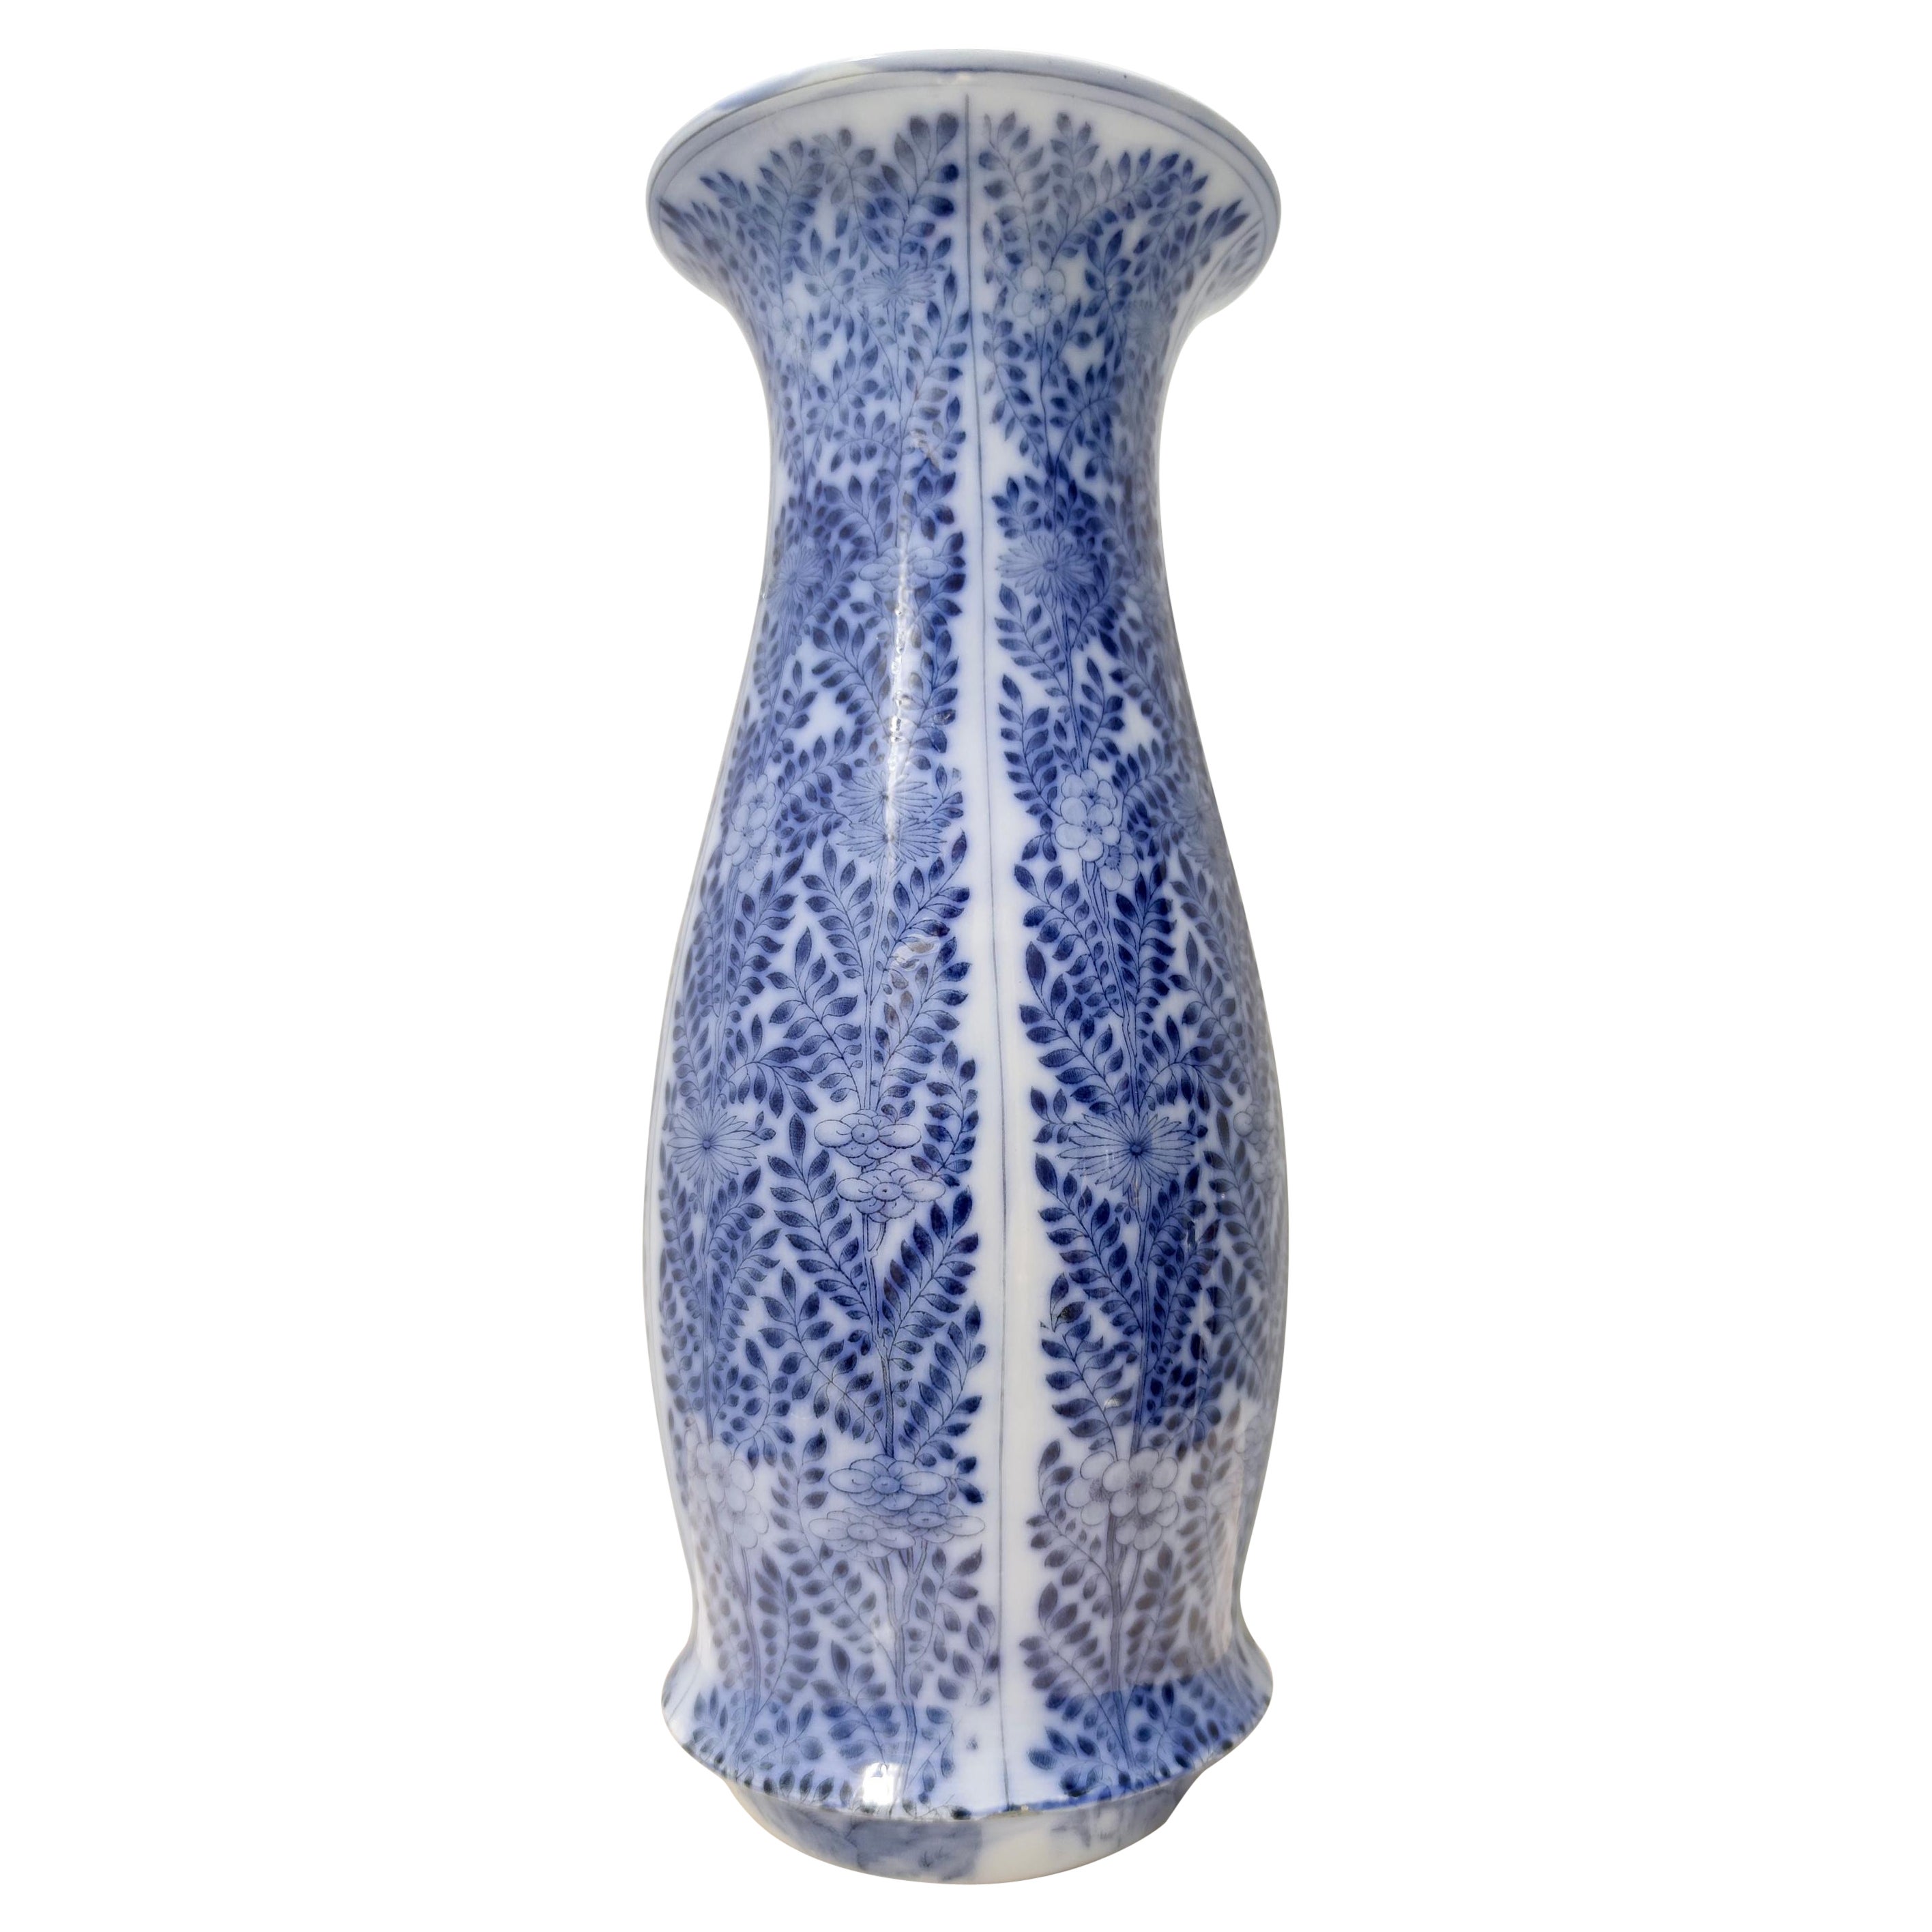 Mid-20th Century Blue Lacquered Ceramic Vase by Laveno Chinoiserie Style, Italy For Sale